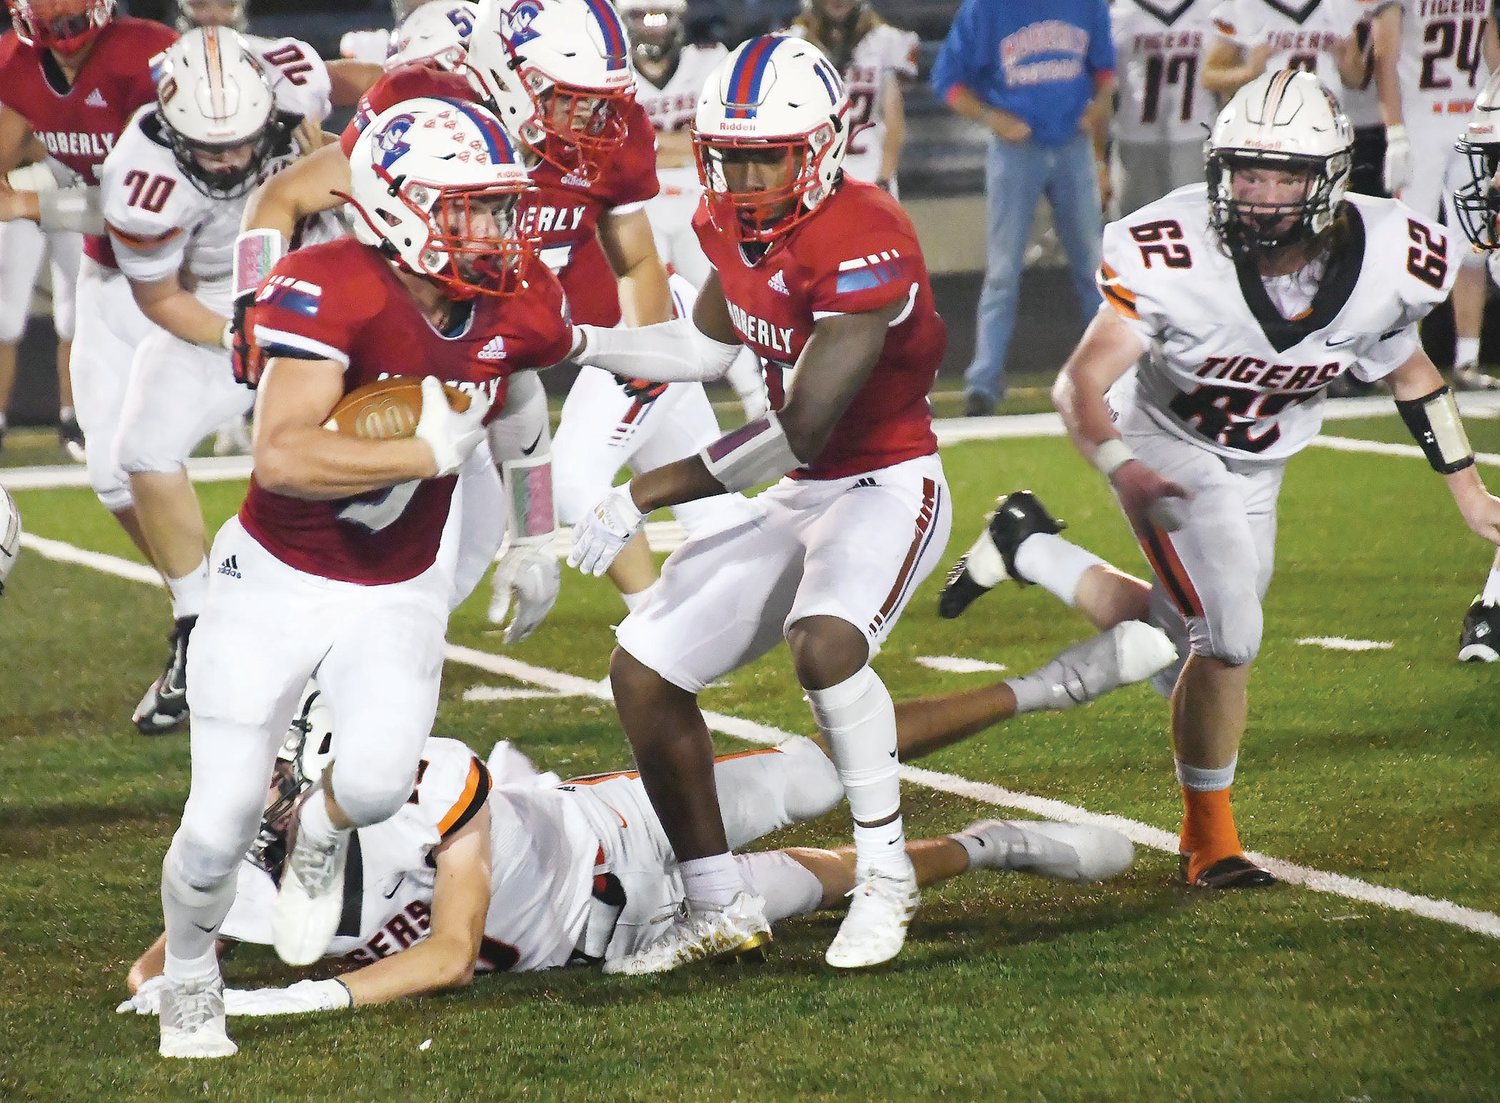 Moberly's Gage St. Clair tries to escape a Kirksville tackle during Friday's North Central Missouri Conference football game. The Tigers topped the Spartans, 34-14.